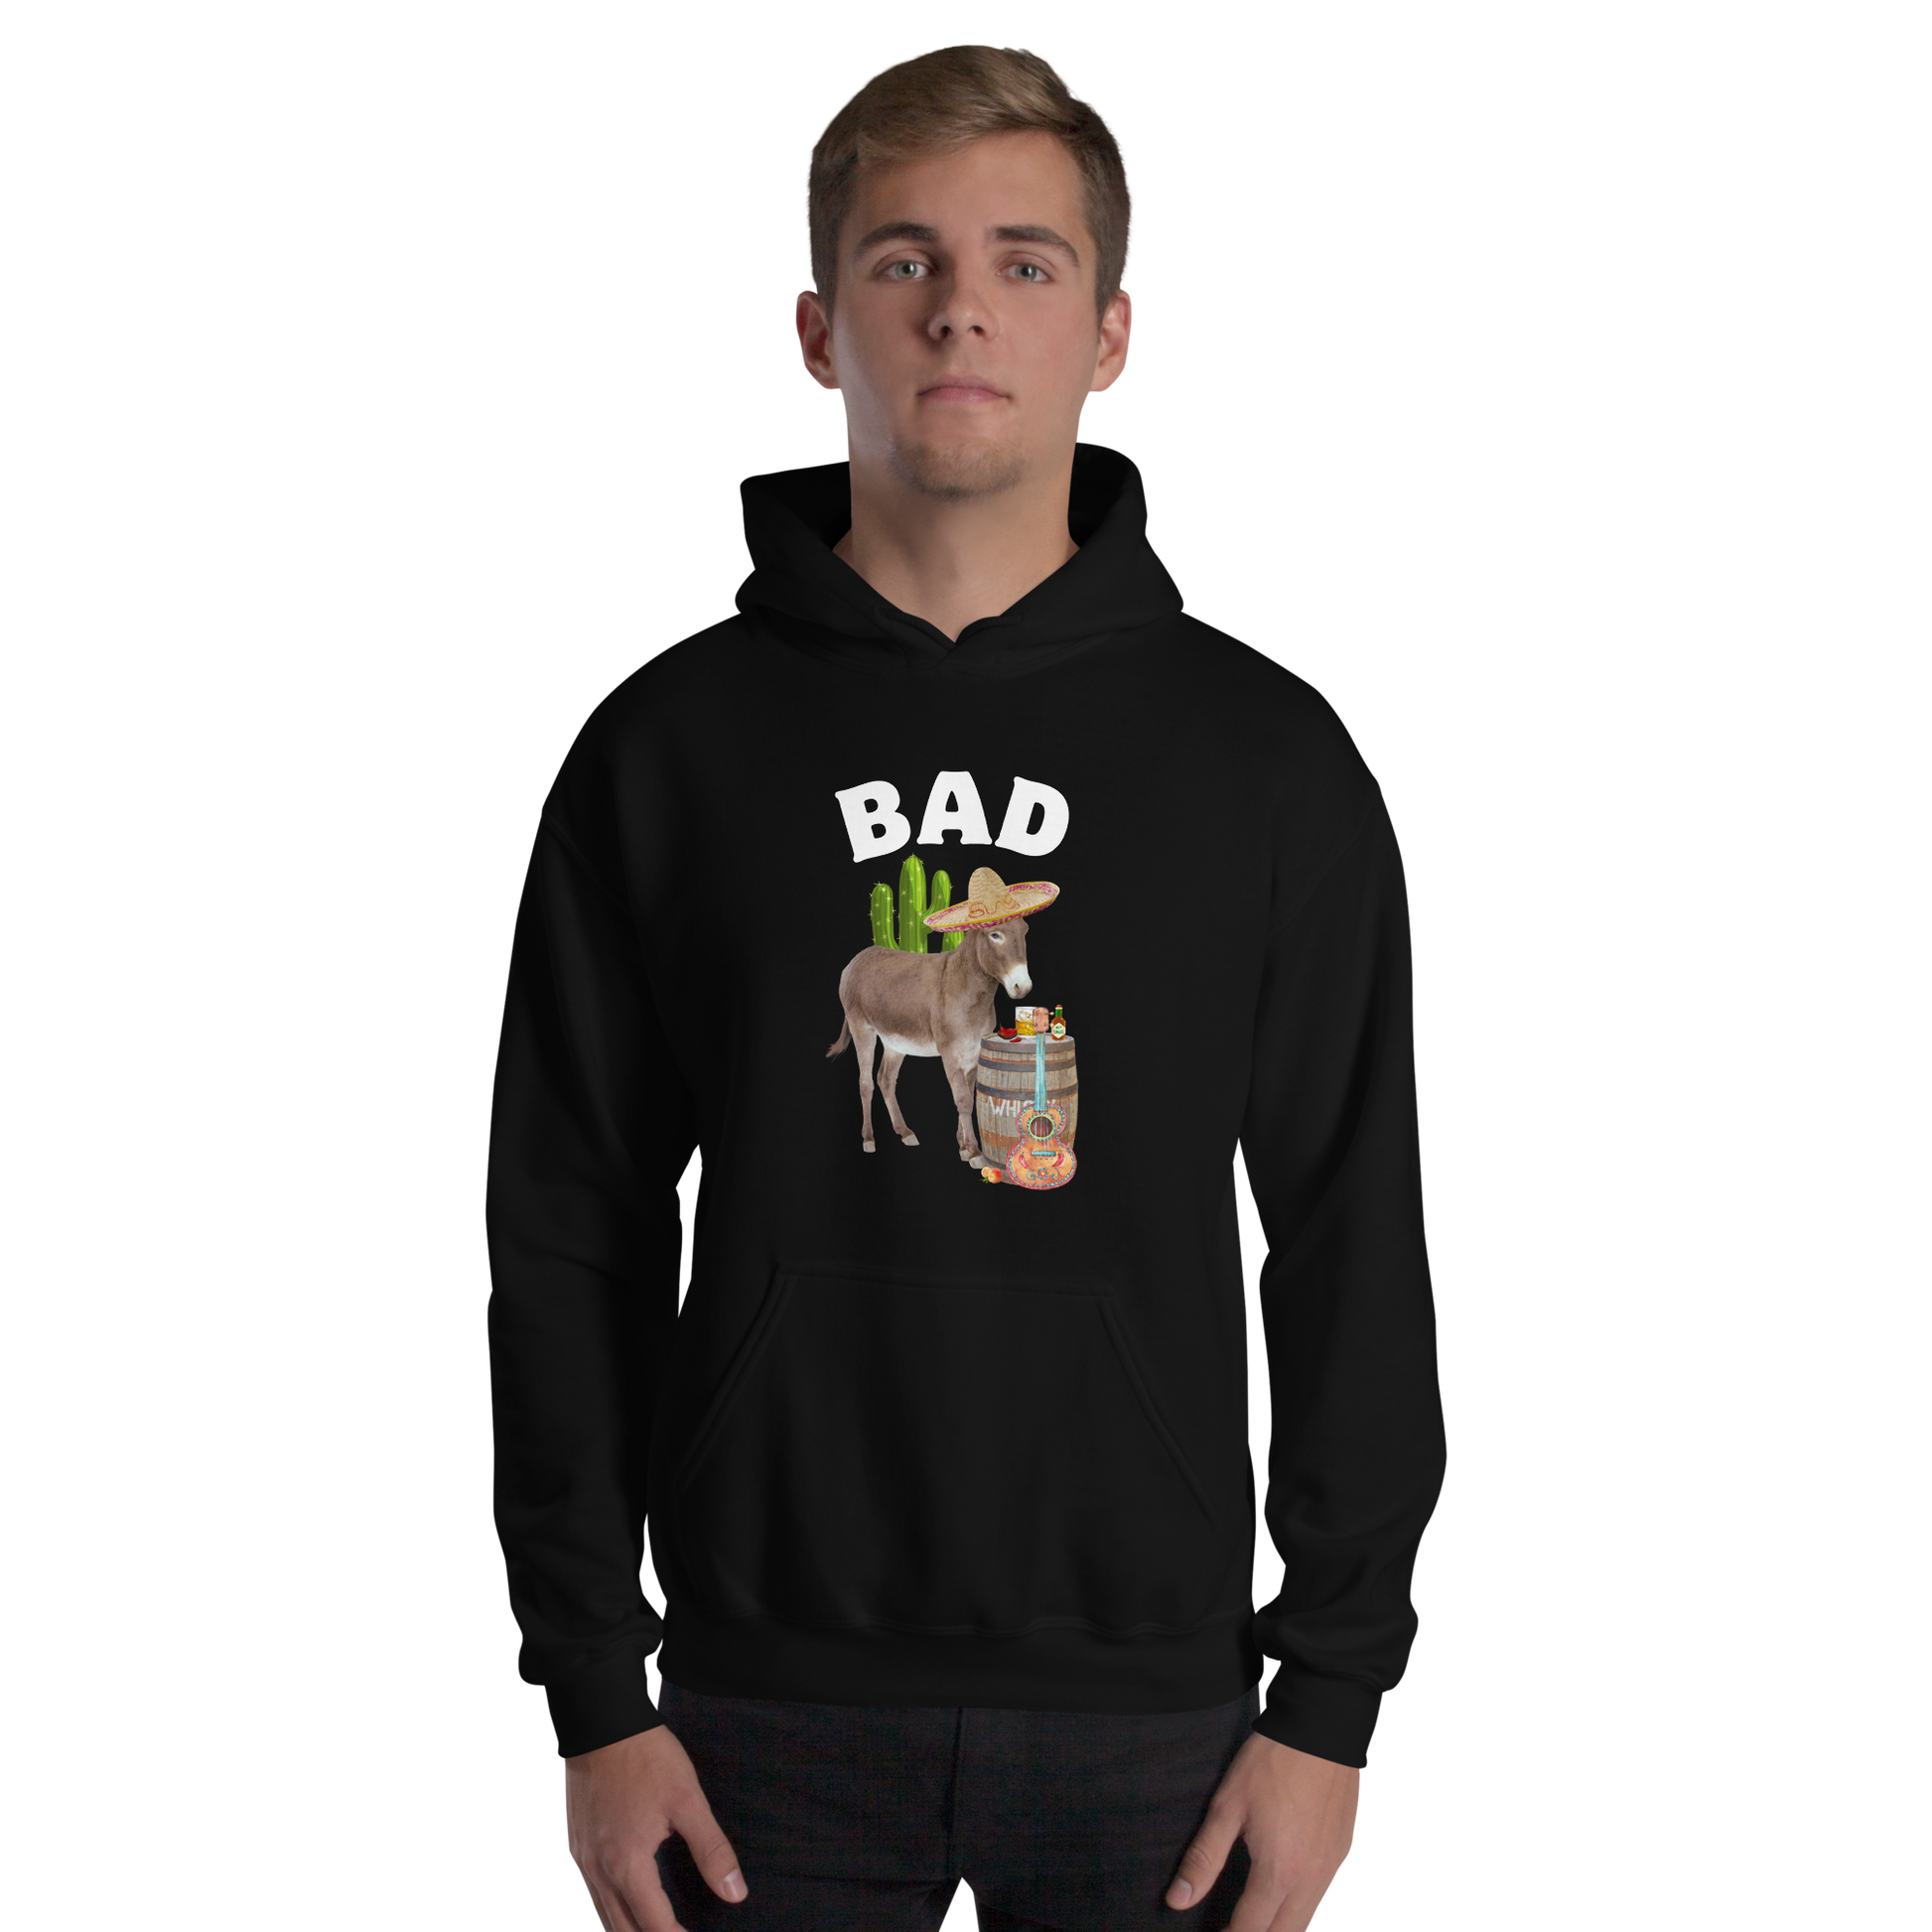 Man wearing a Black Donkey Hoodie Featuring a Funny Bad Ass Donkey graphic on the chest - Funny Graphic Bad Ass Donkey Hoodies - Boozy Fox